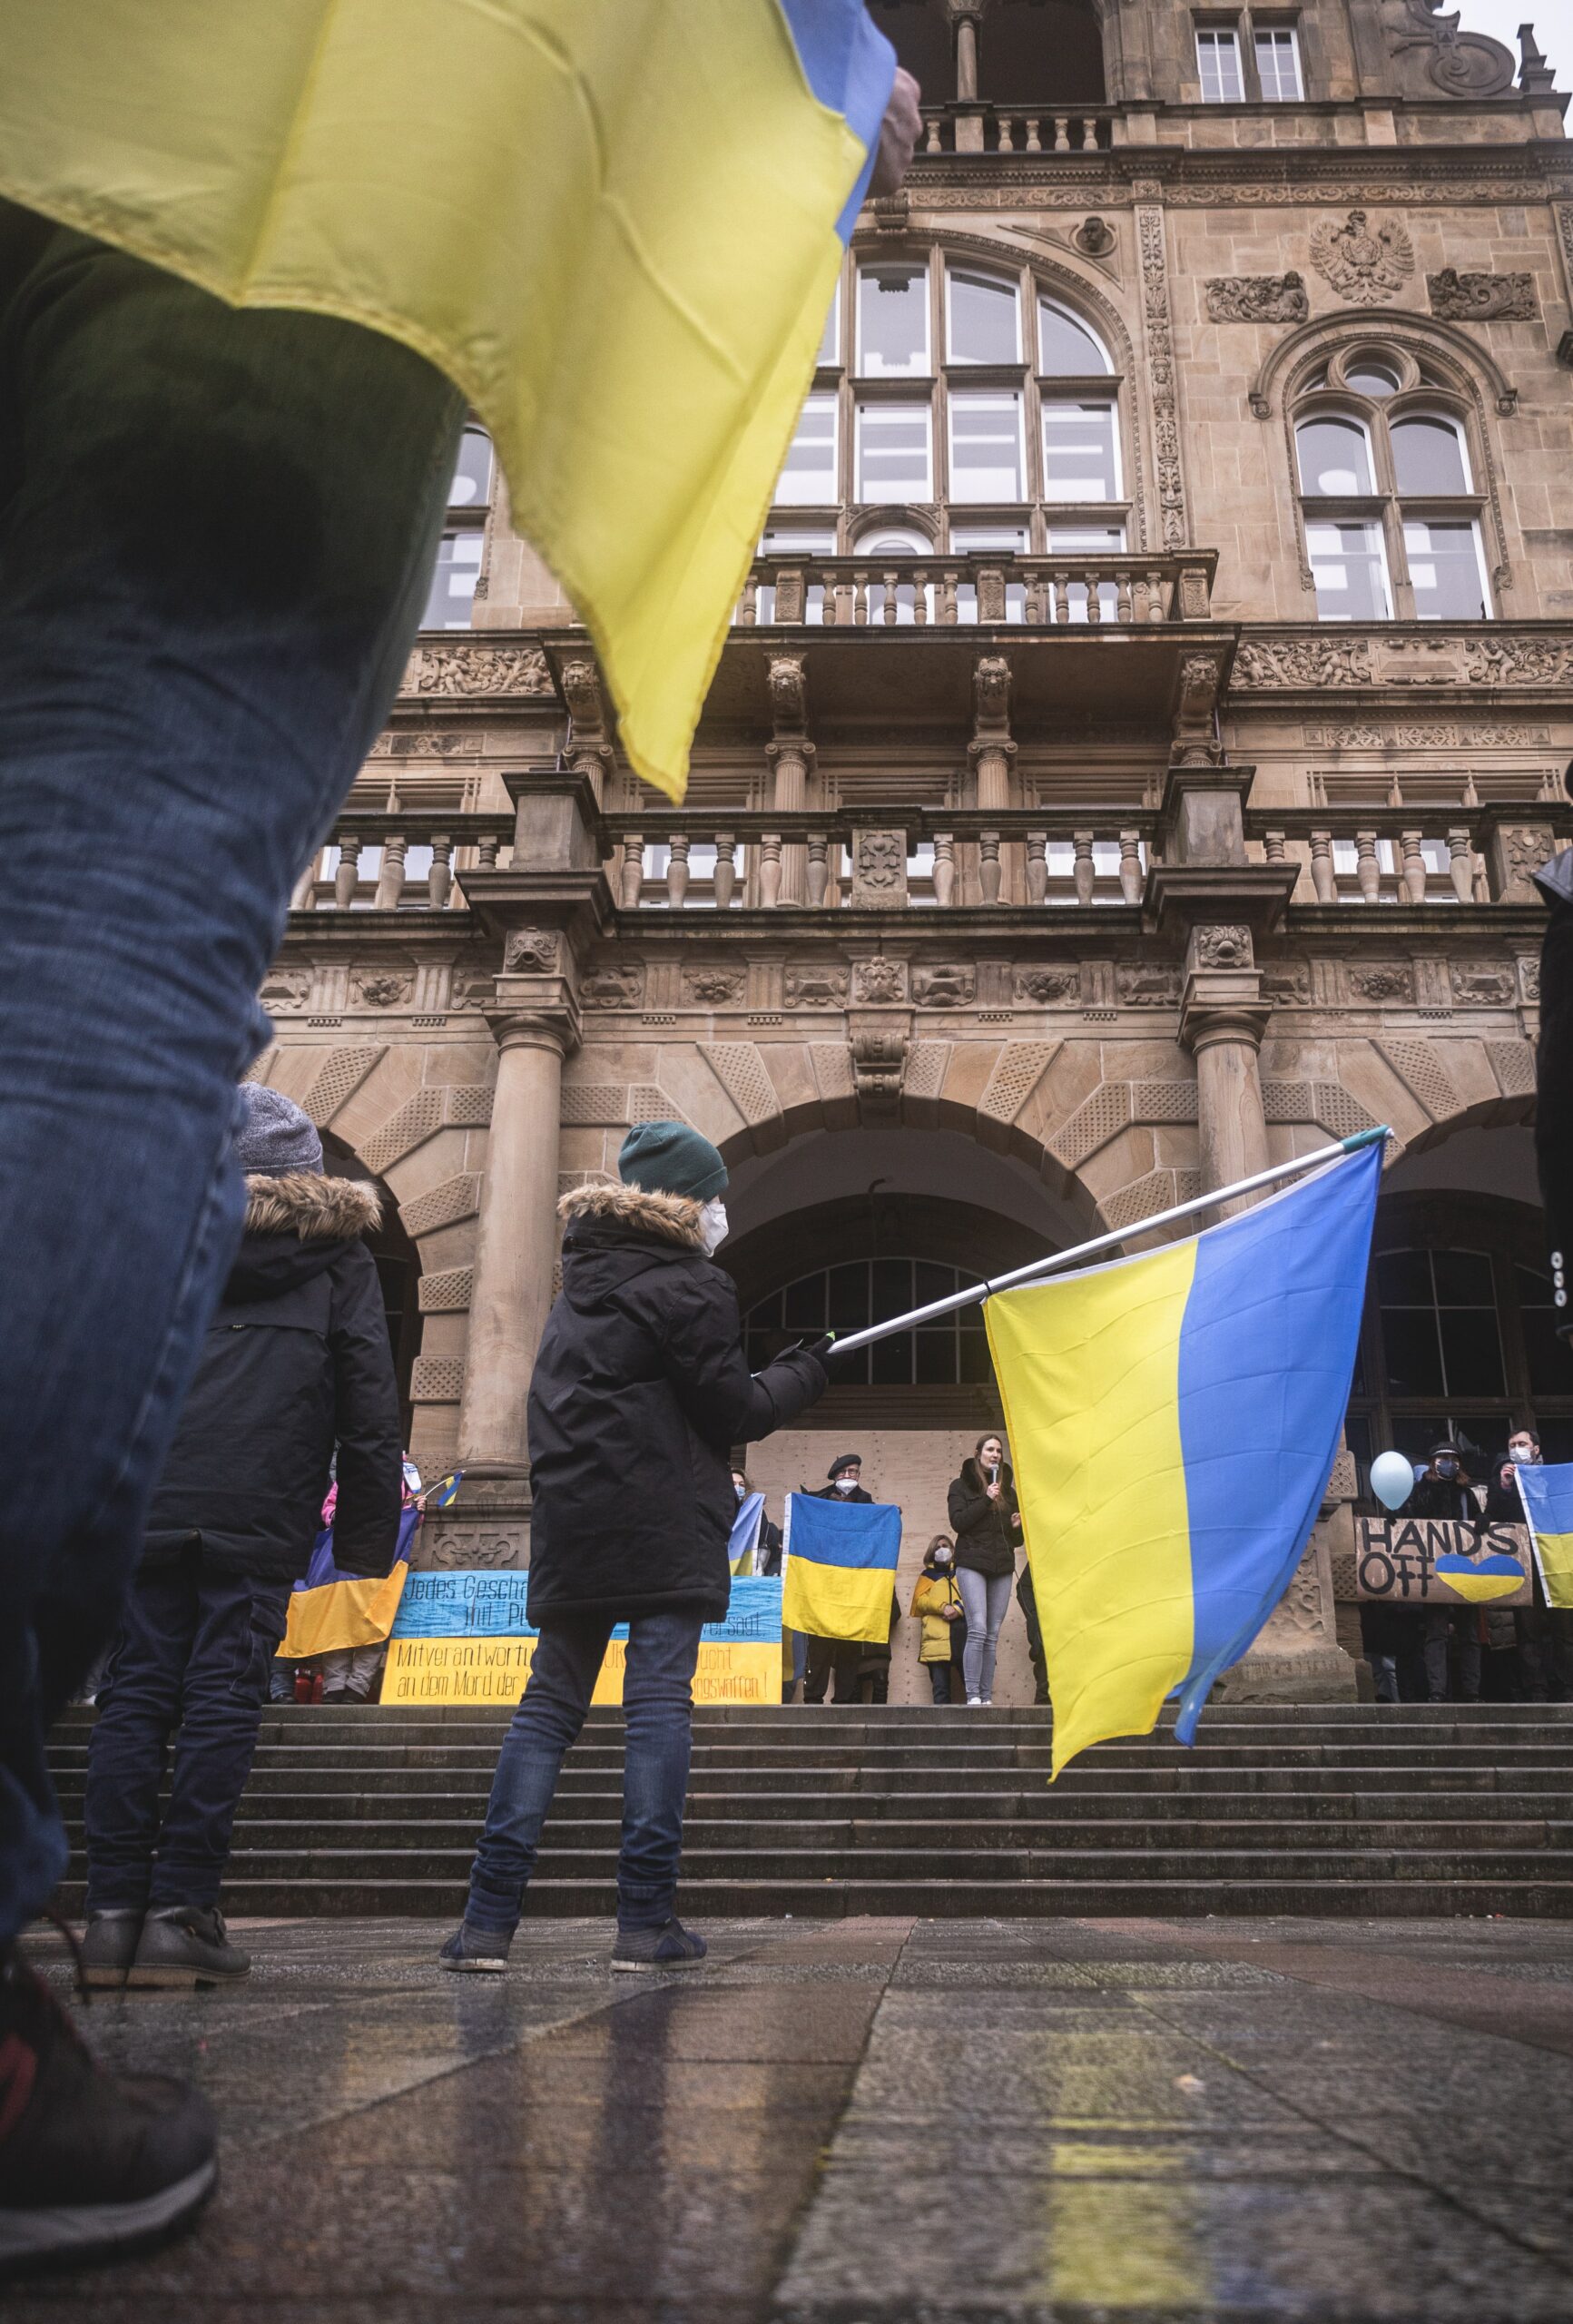 This photo is of people gathered in a group waving large Ukrainian flags.